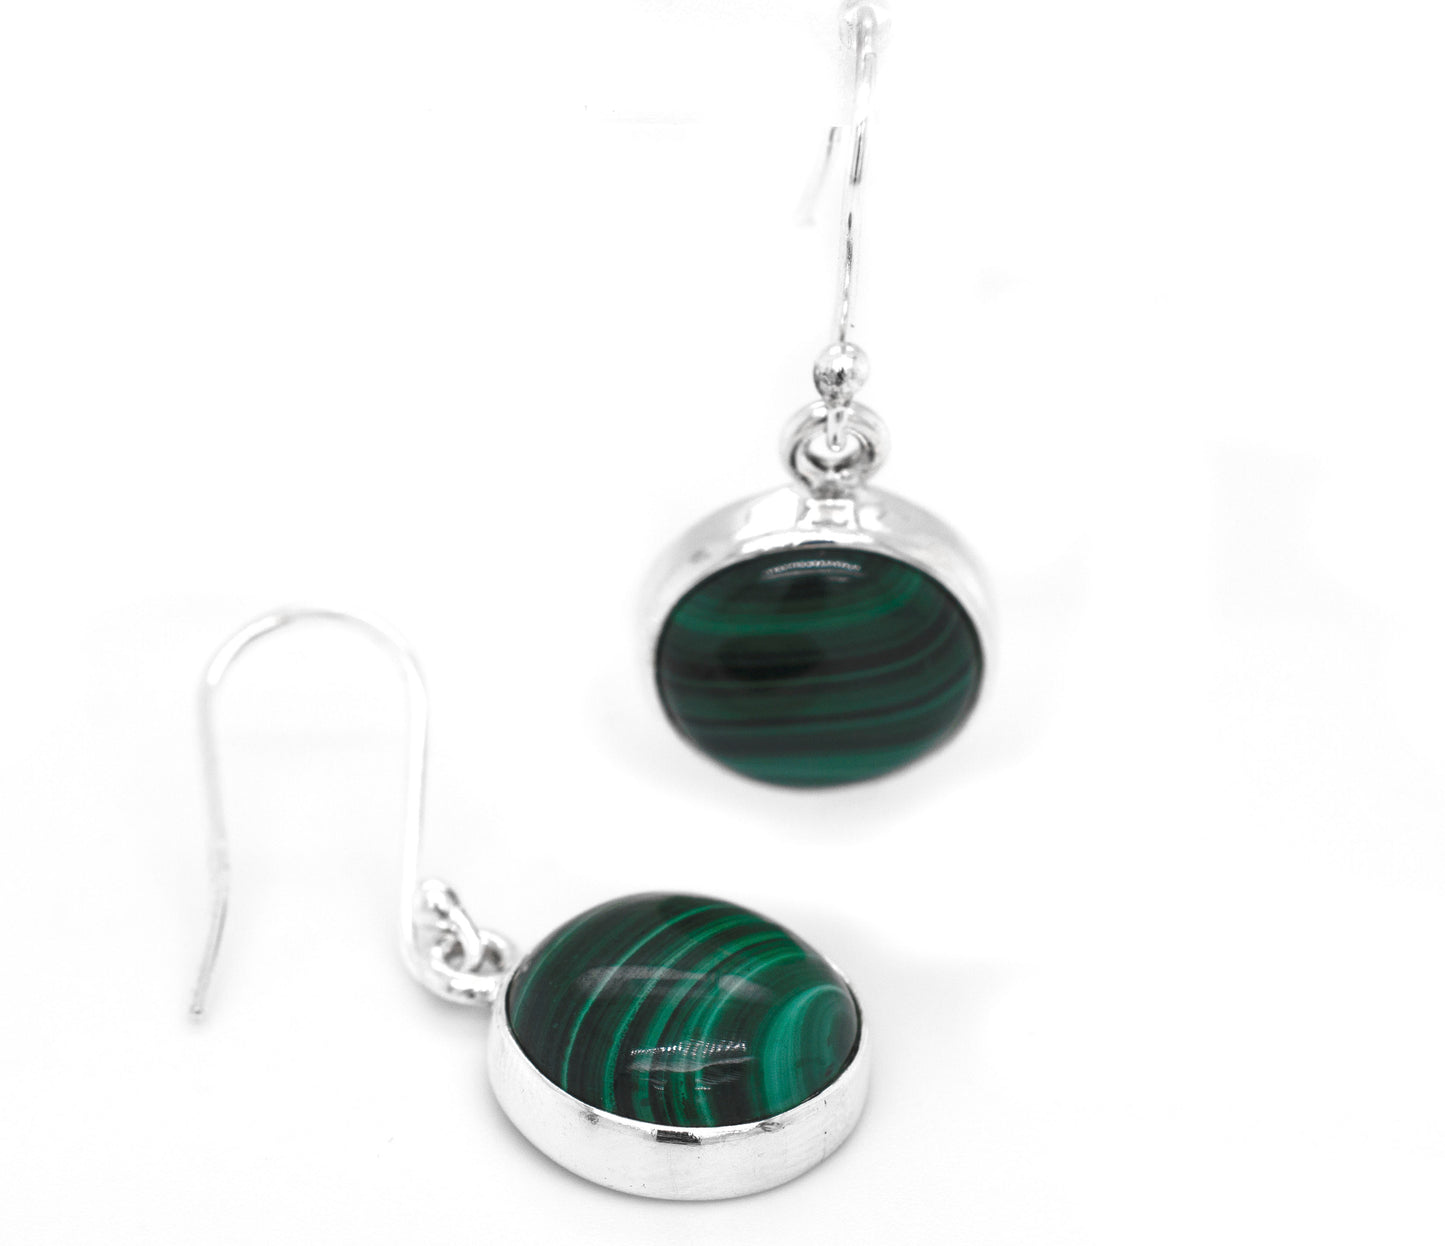 A pair of Super Silver Gorgeous Round Malachite Earrings featuring a mesmerizing green malachite stone known for its healing properties.